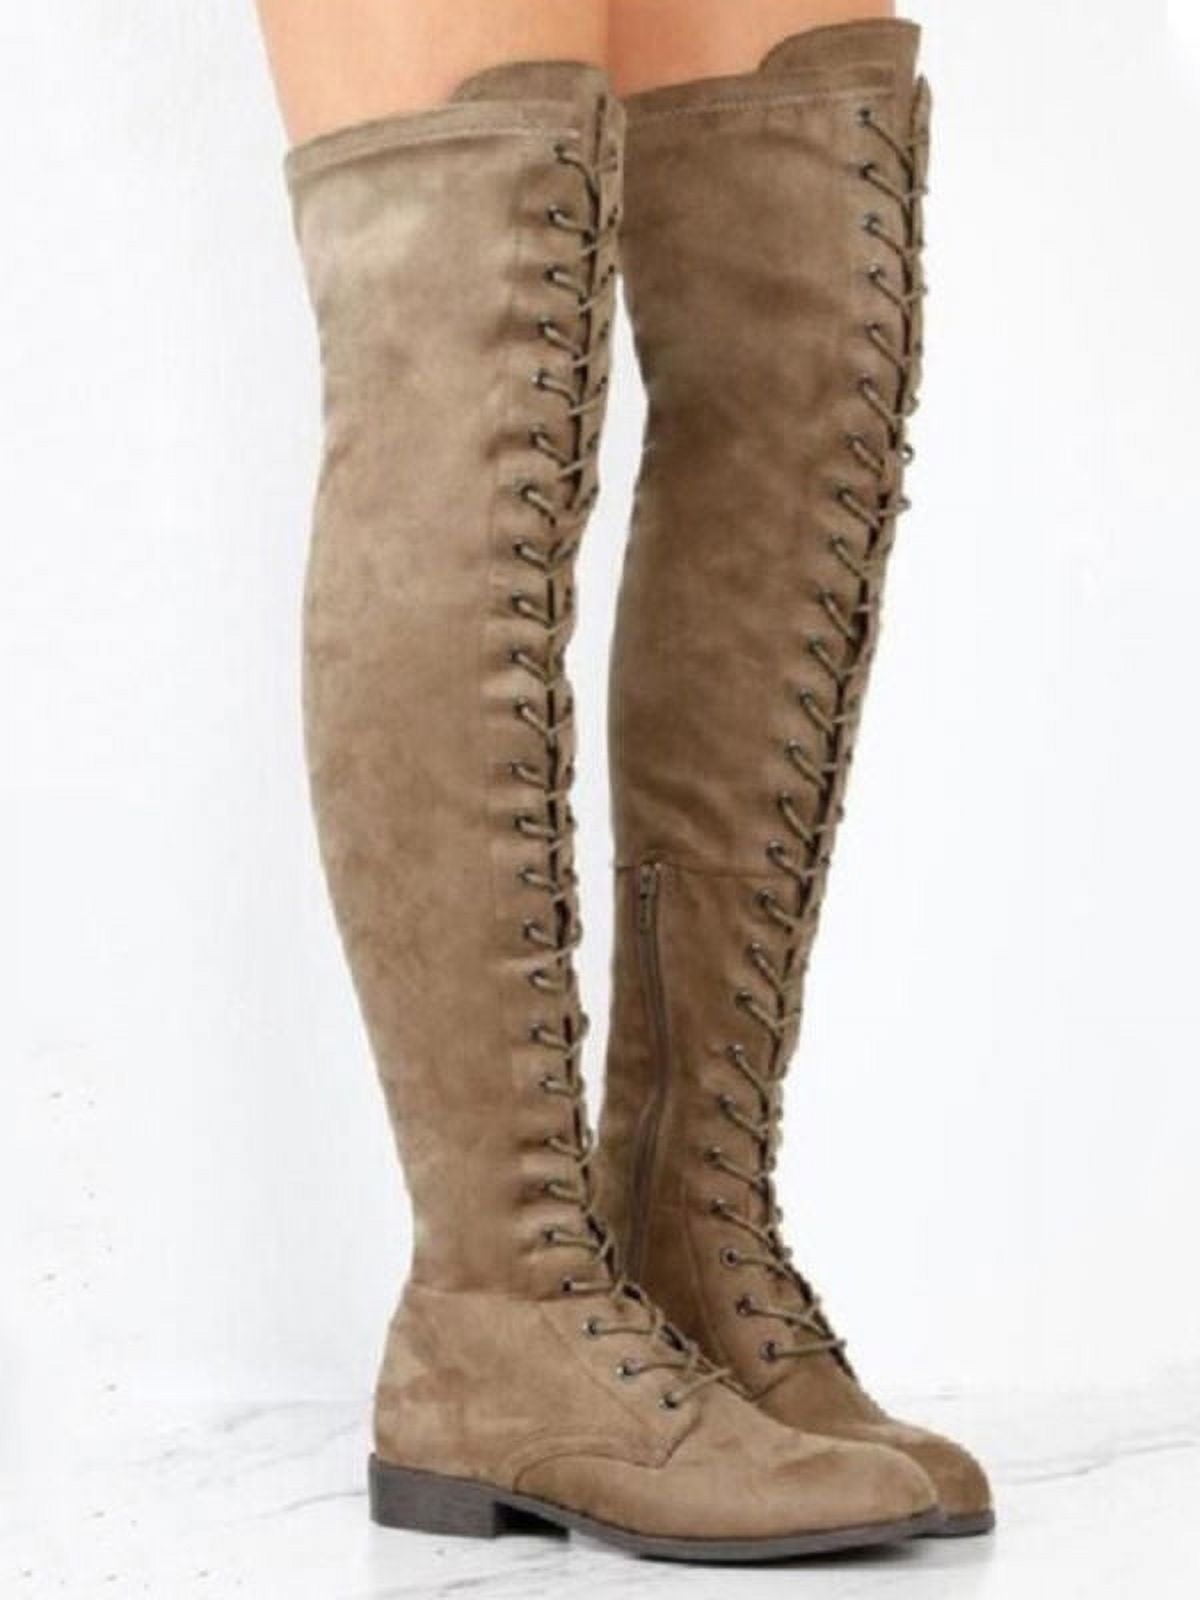 Ladies Thigh High Boots Womens Lace Up Over The Knee Low Heel Flats Shoes  Size